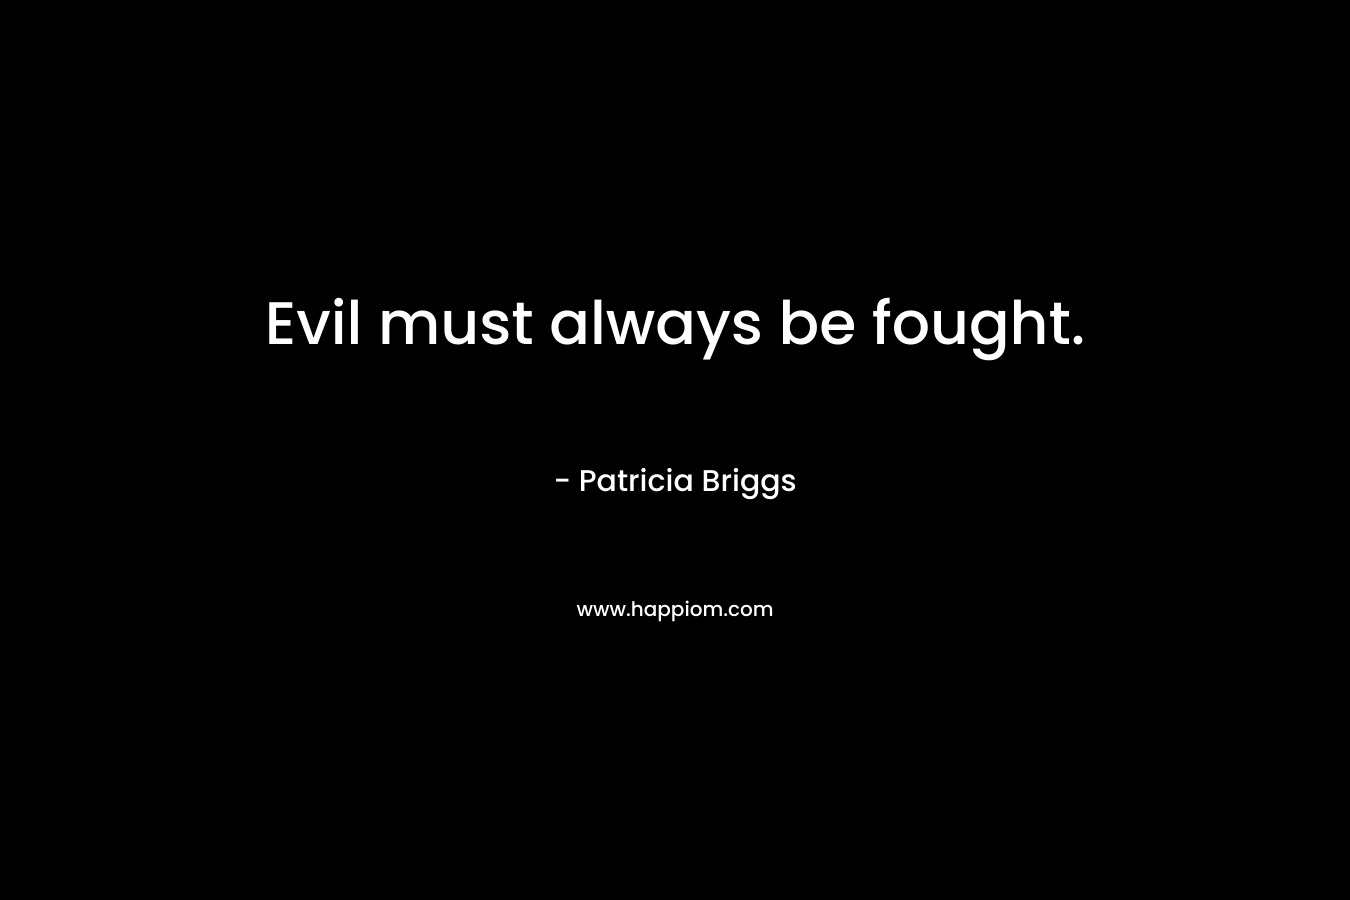 Evil must always be fought.